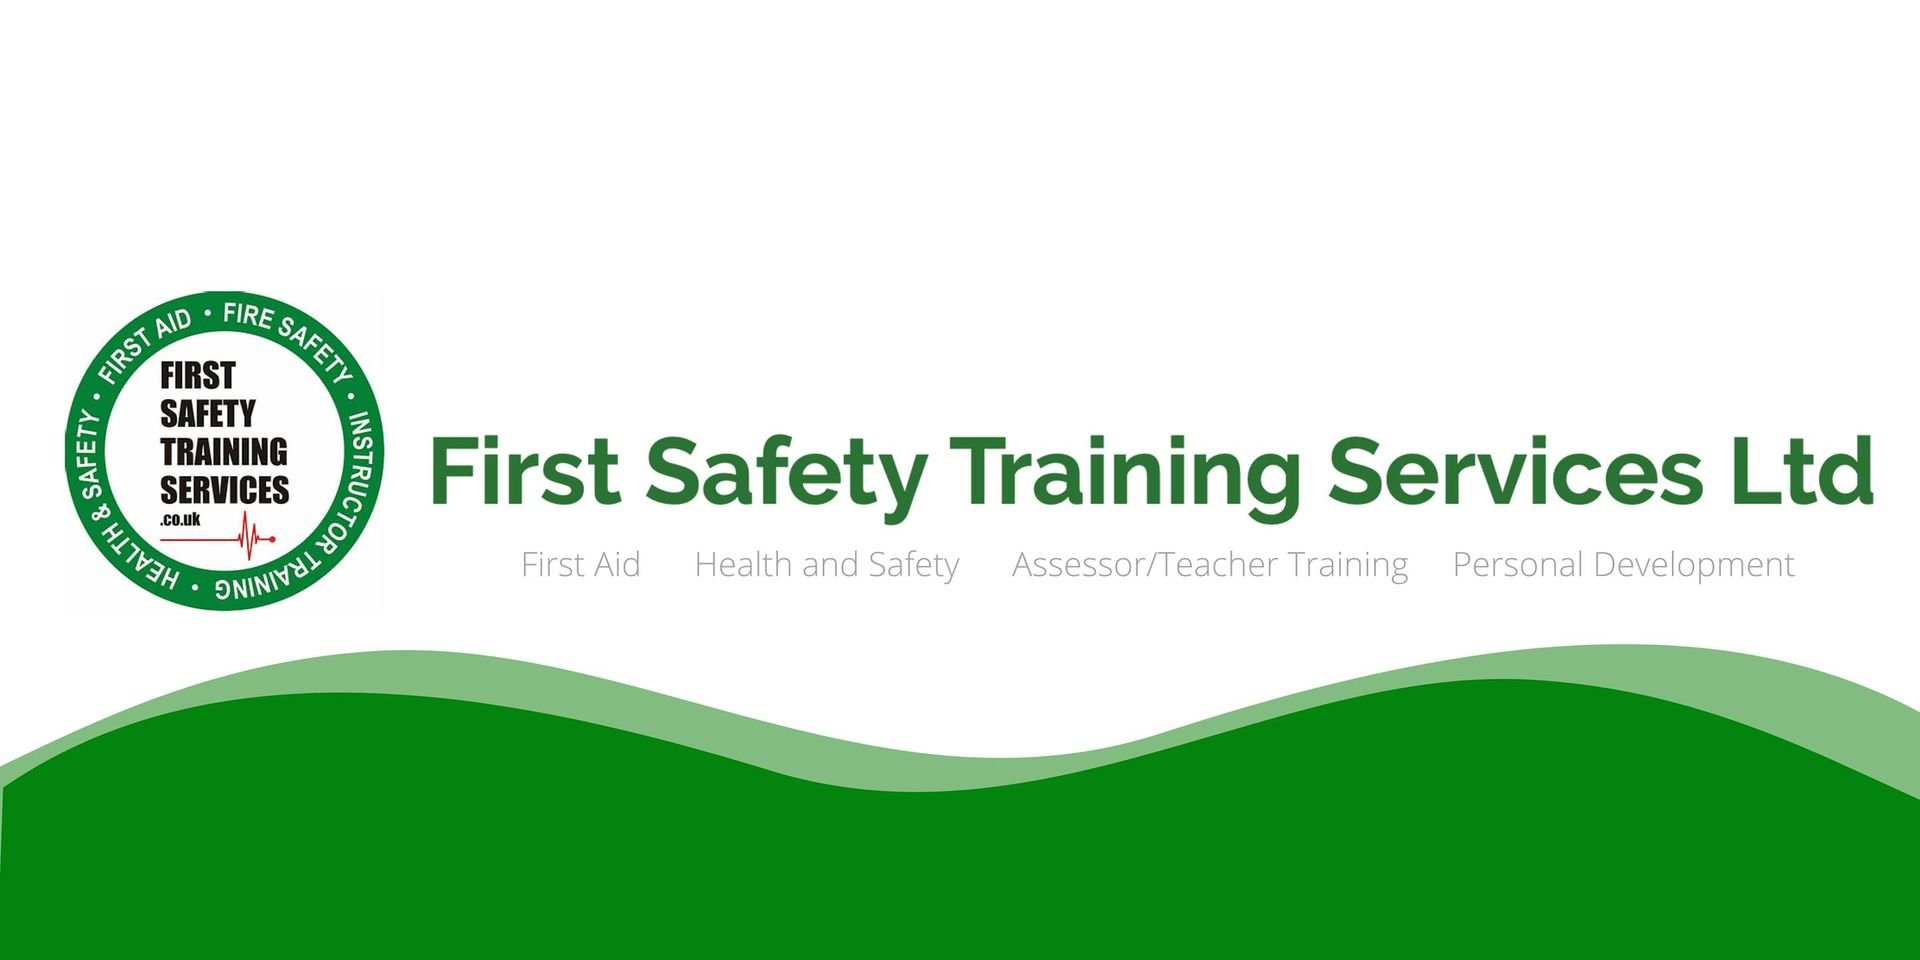 First Safety Training Services